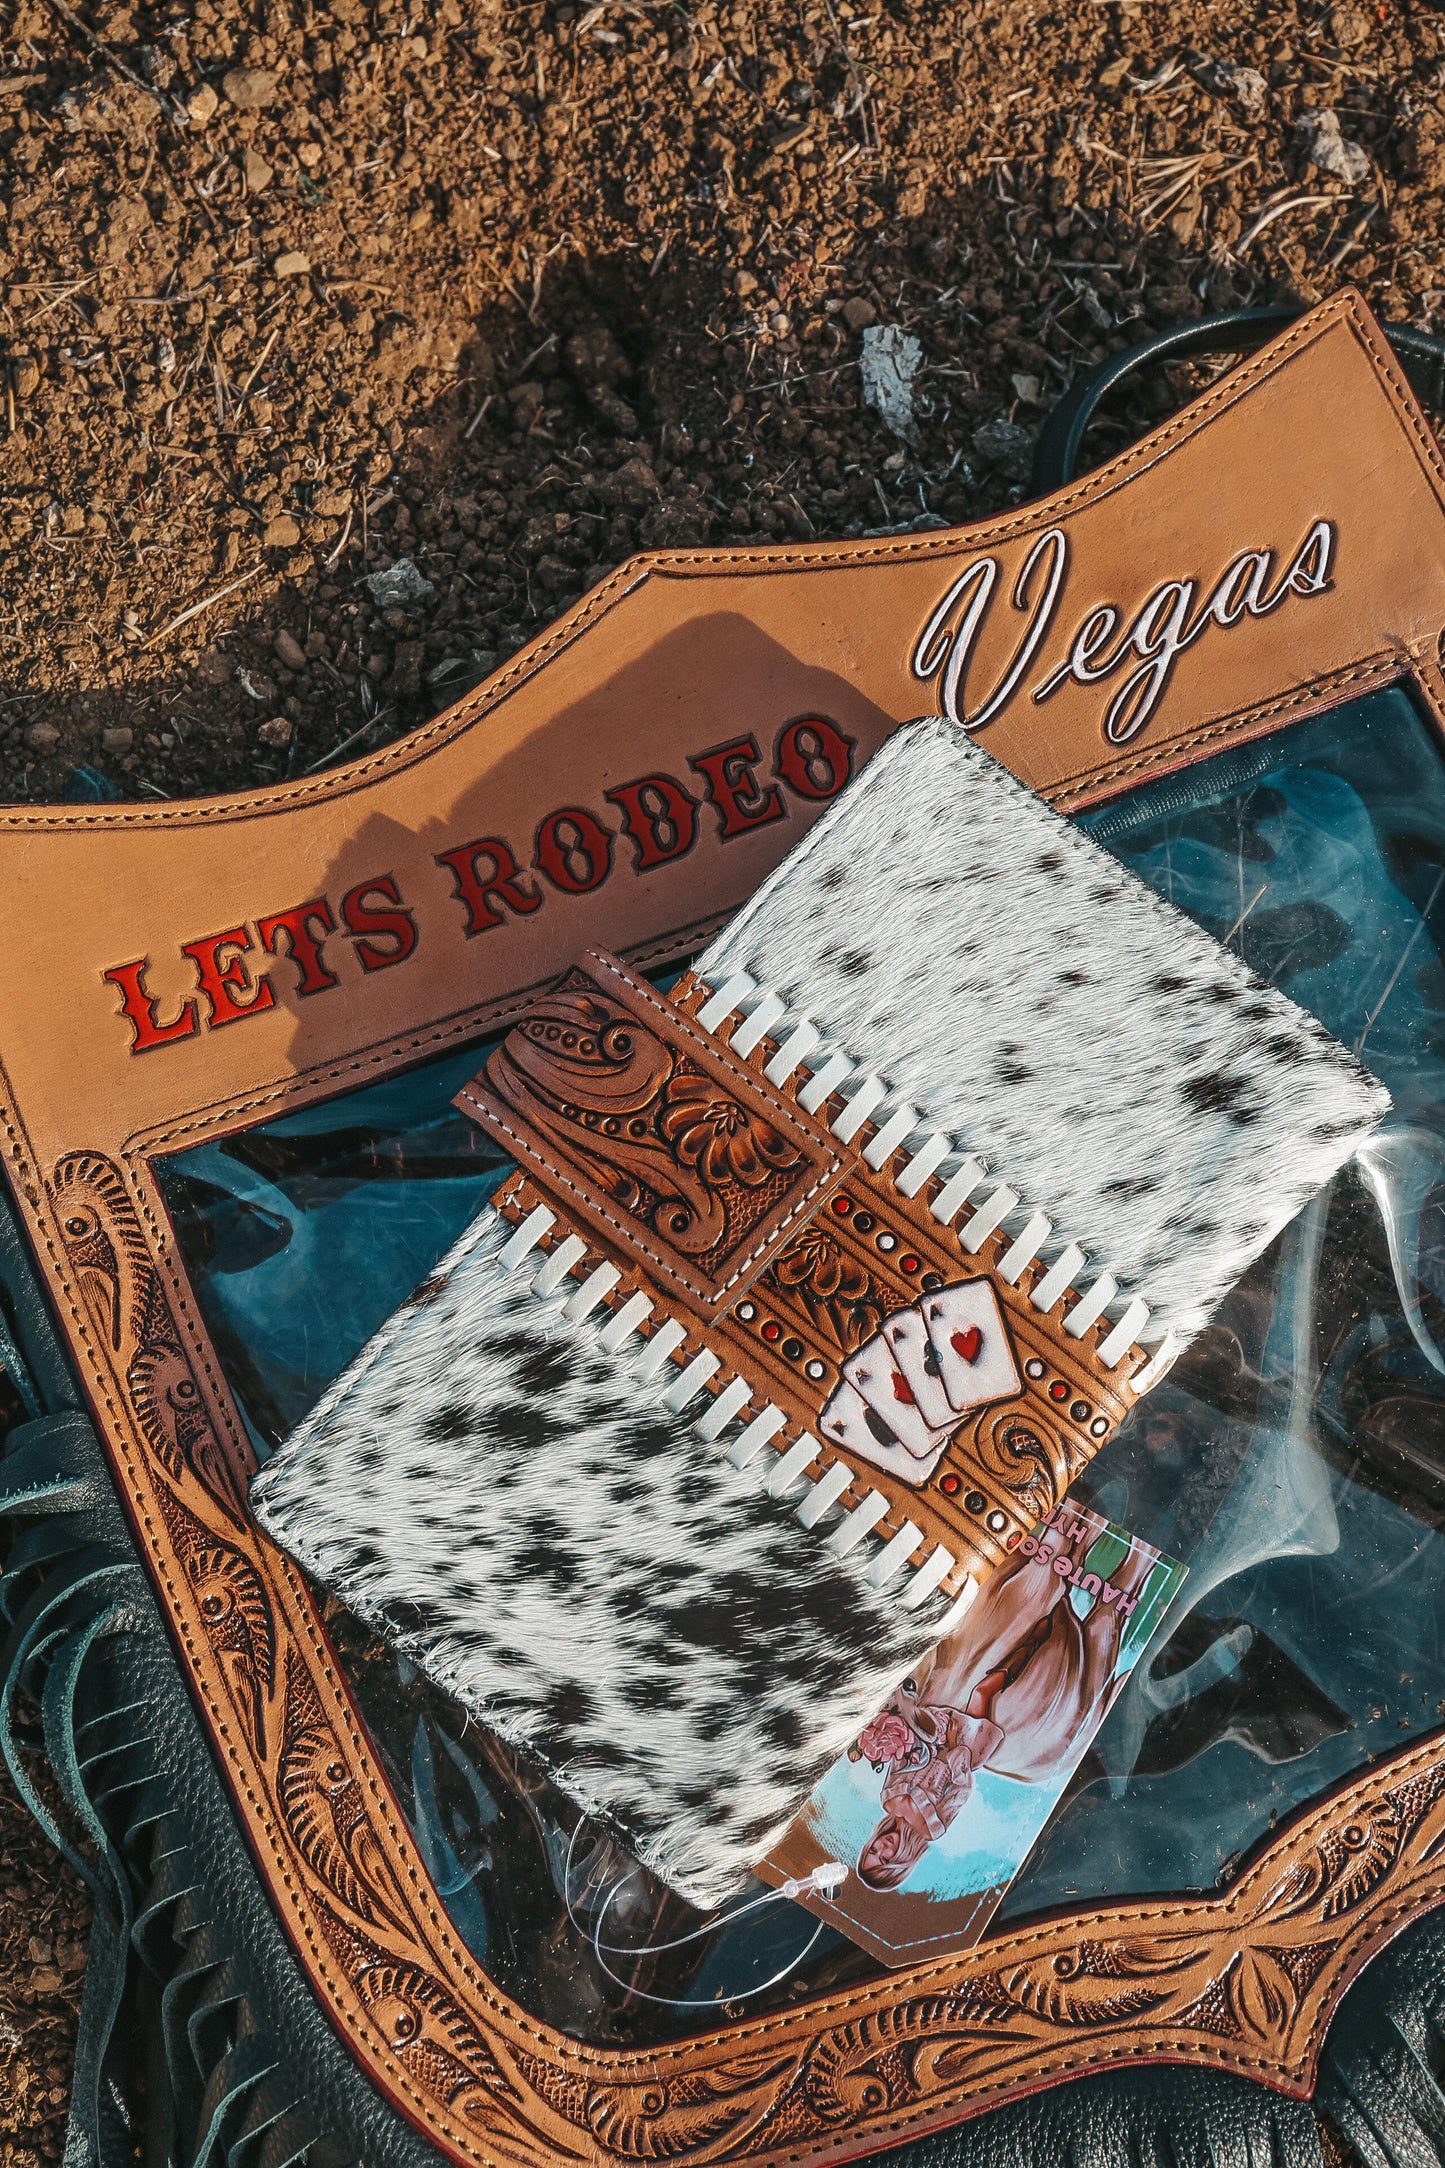 Let’s Rodeo Vegas NFR Clear Bag Policy a Haute Southern Hyde by Beth Marie Exclusive